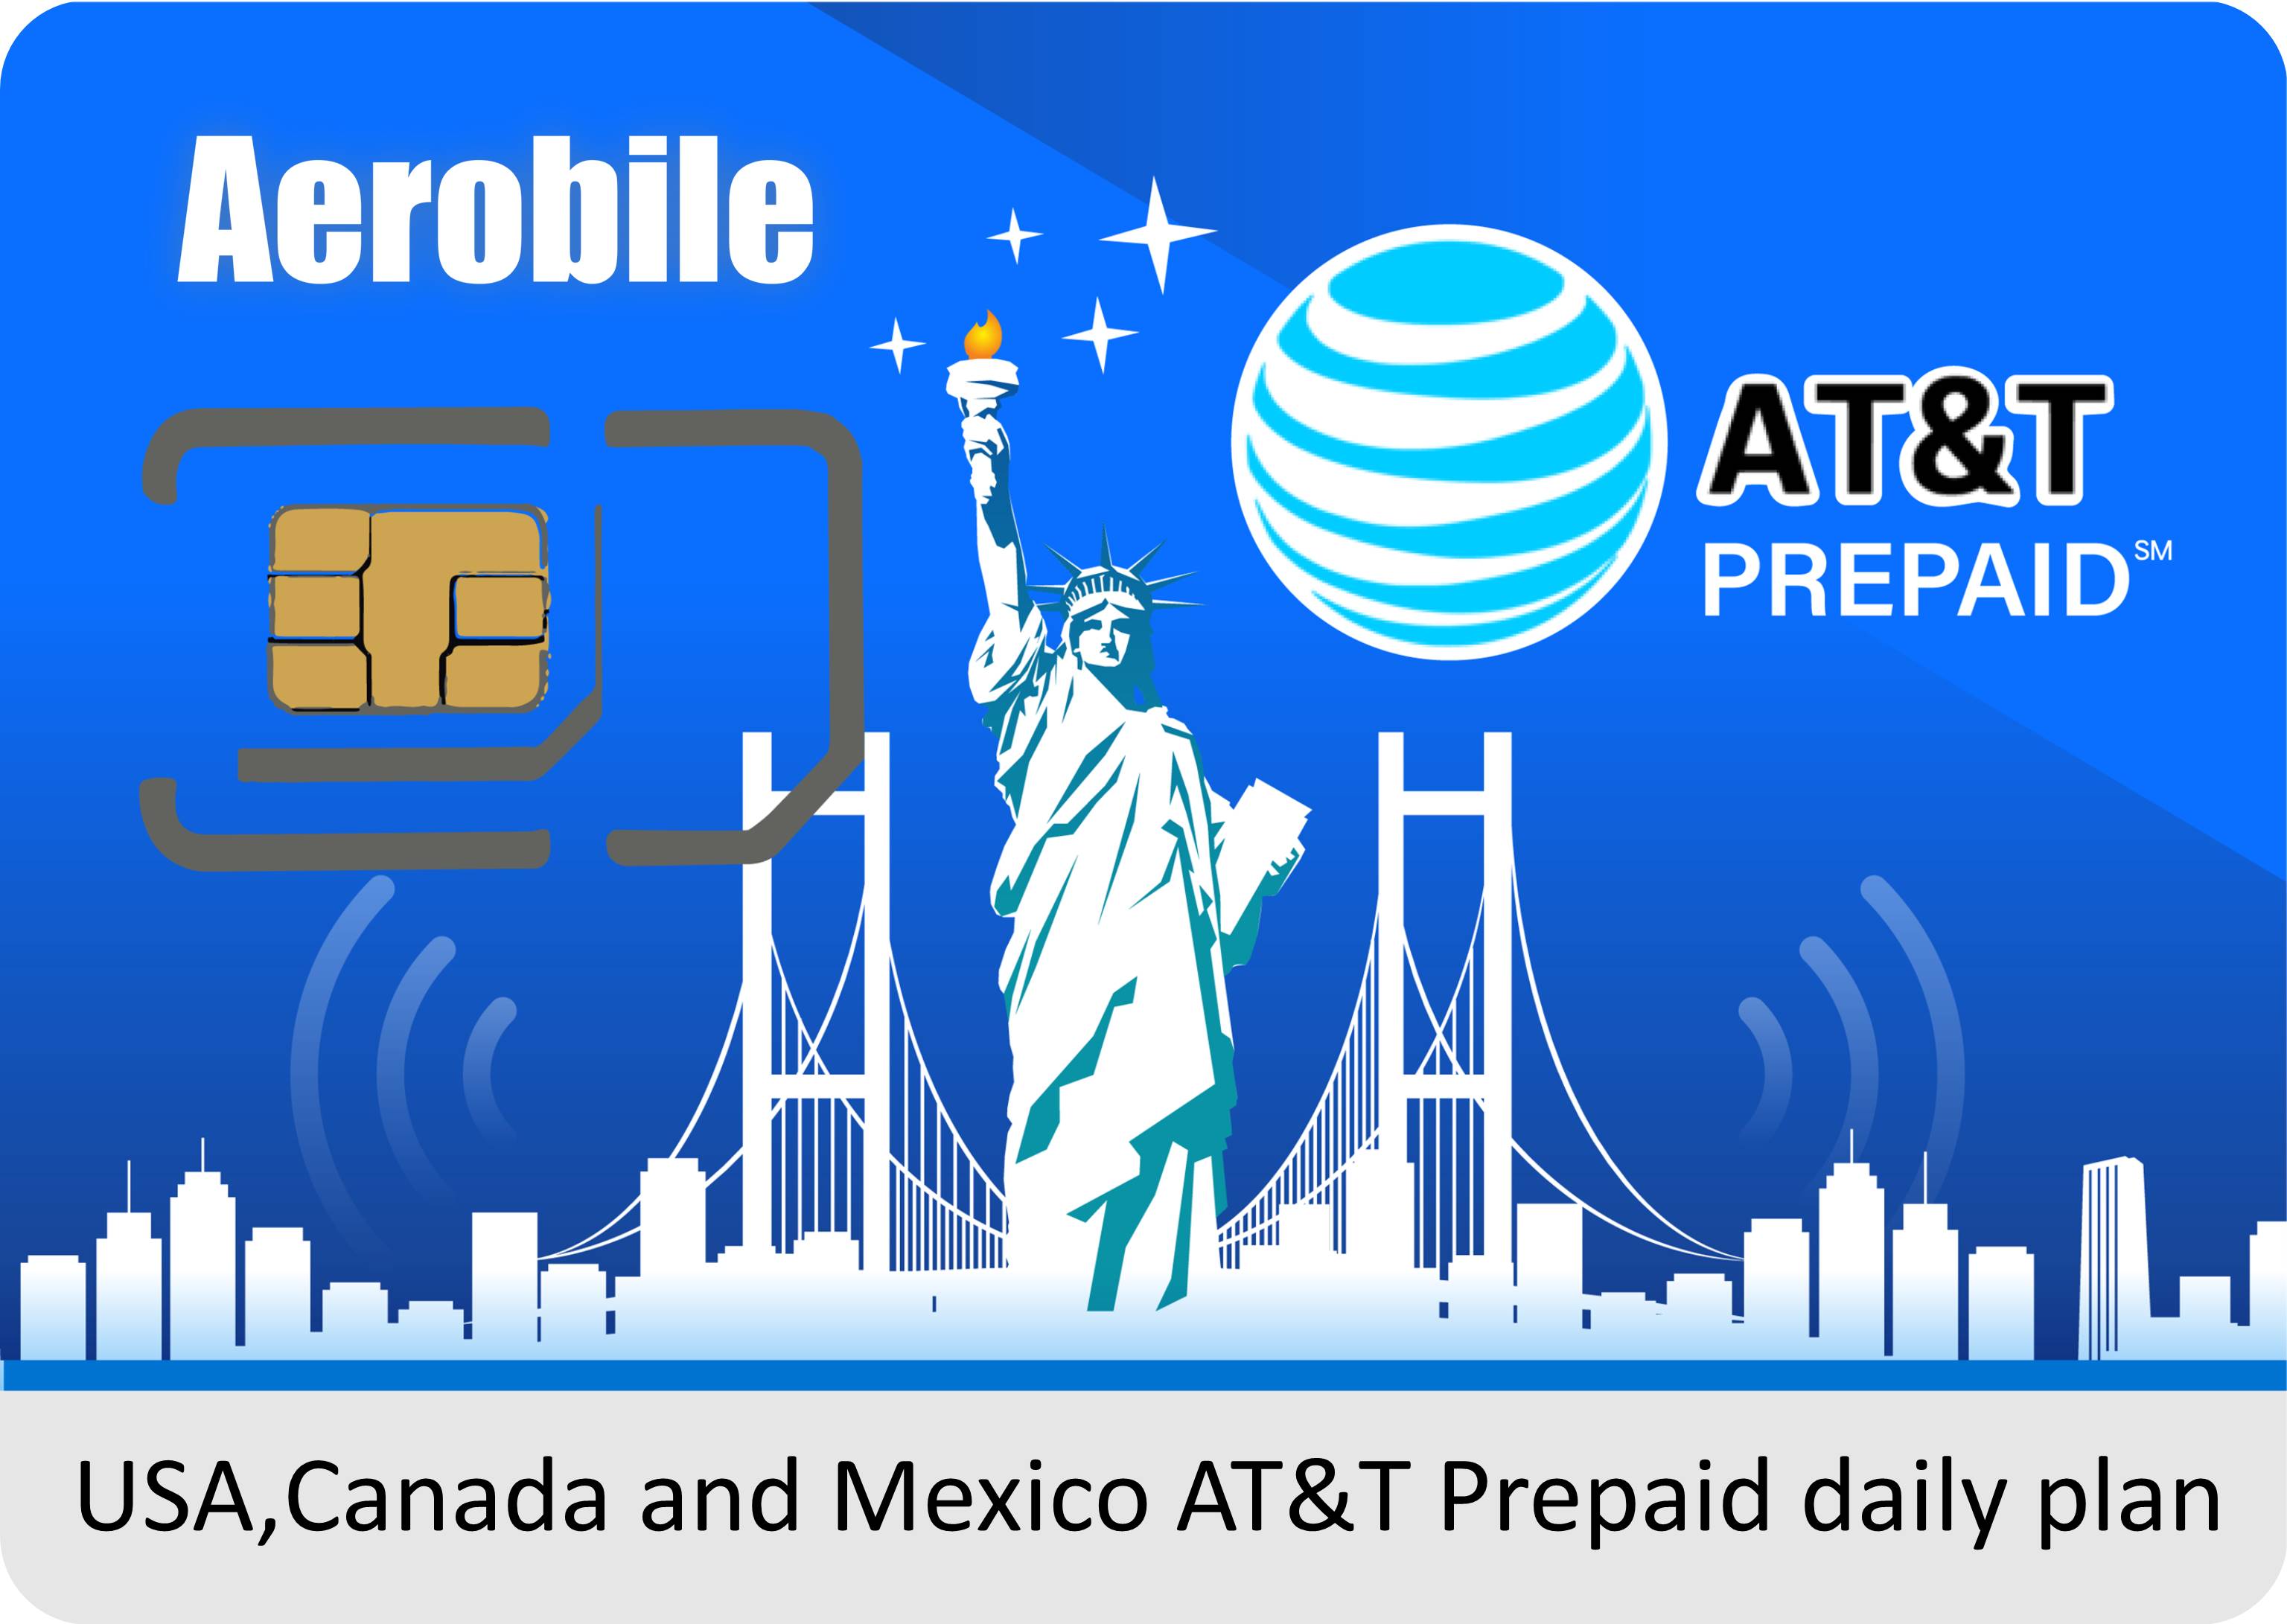 USA AT&T Prepaid SIM card - high speed data + unlimited calls (service in USA,Canada and Mexico)